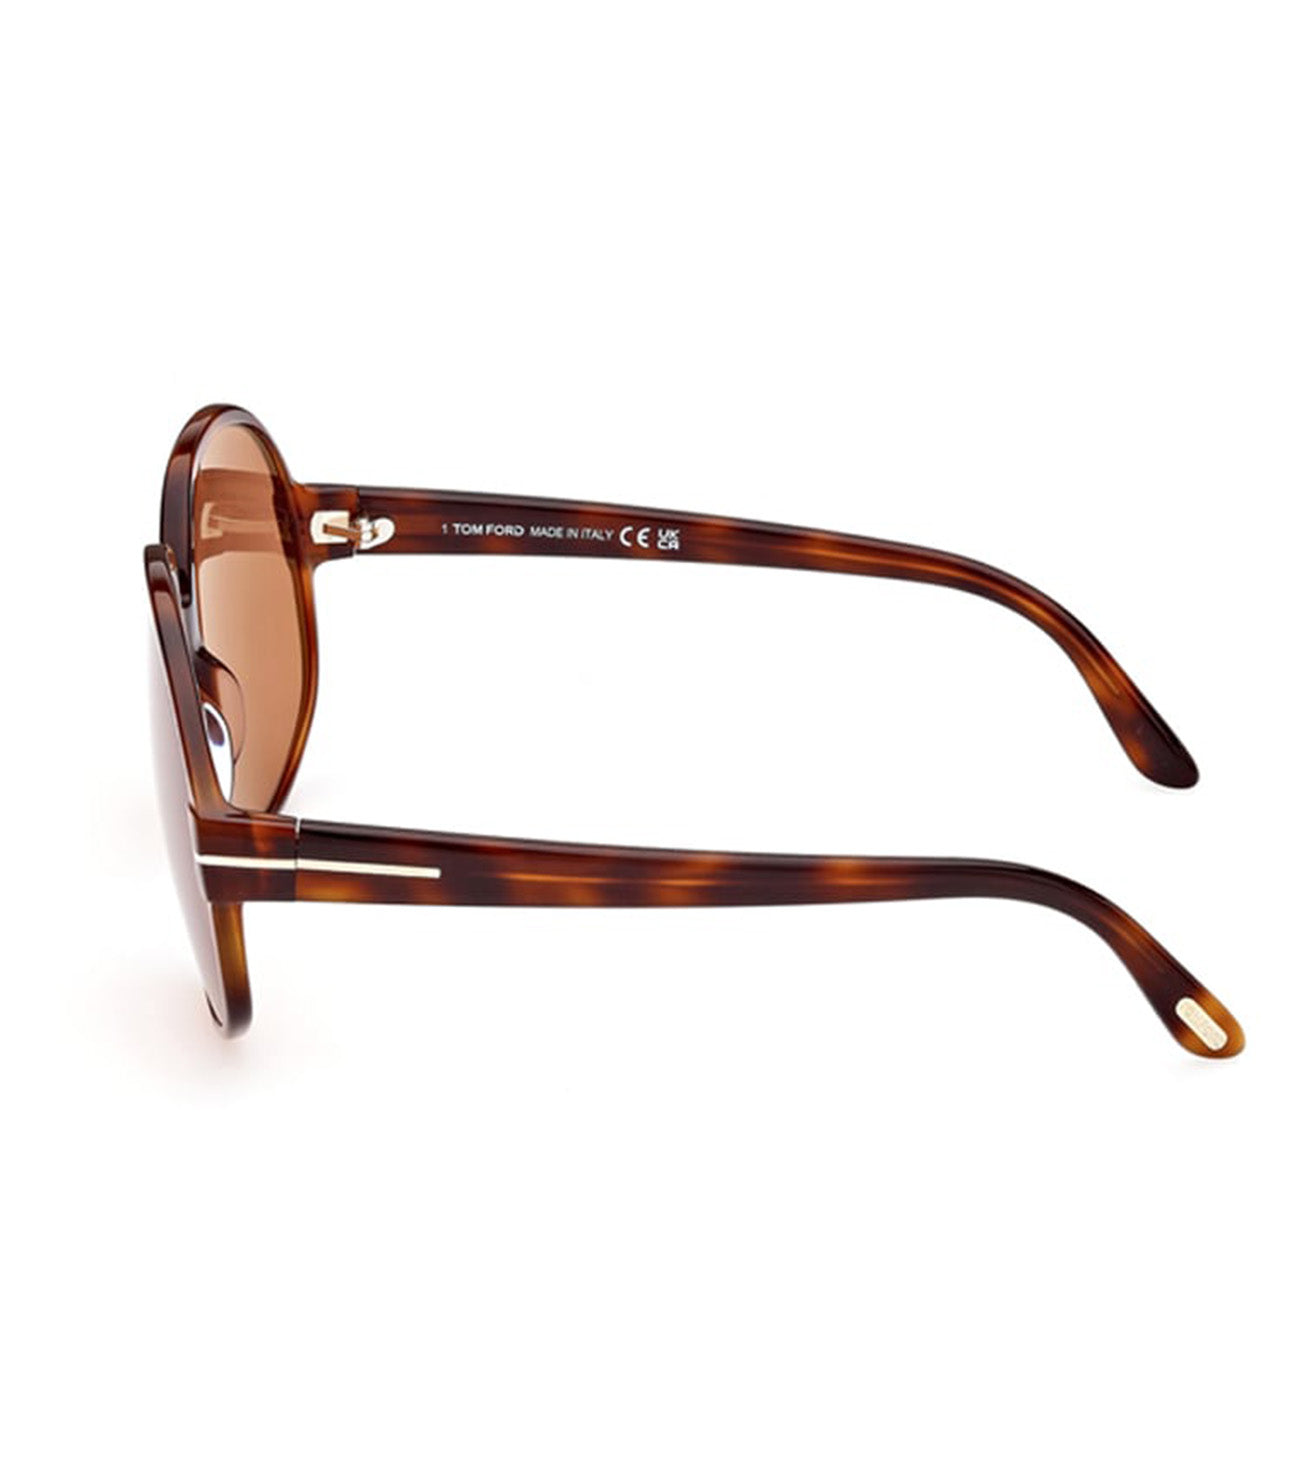 Tom Ford Women's Brown Round Sunglasses